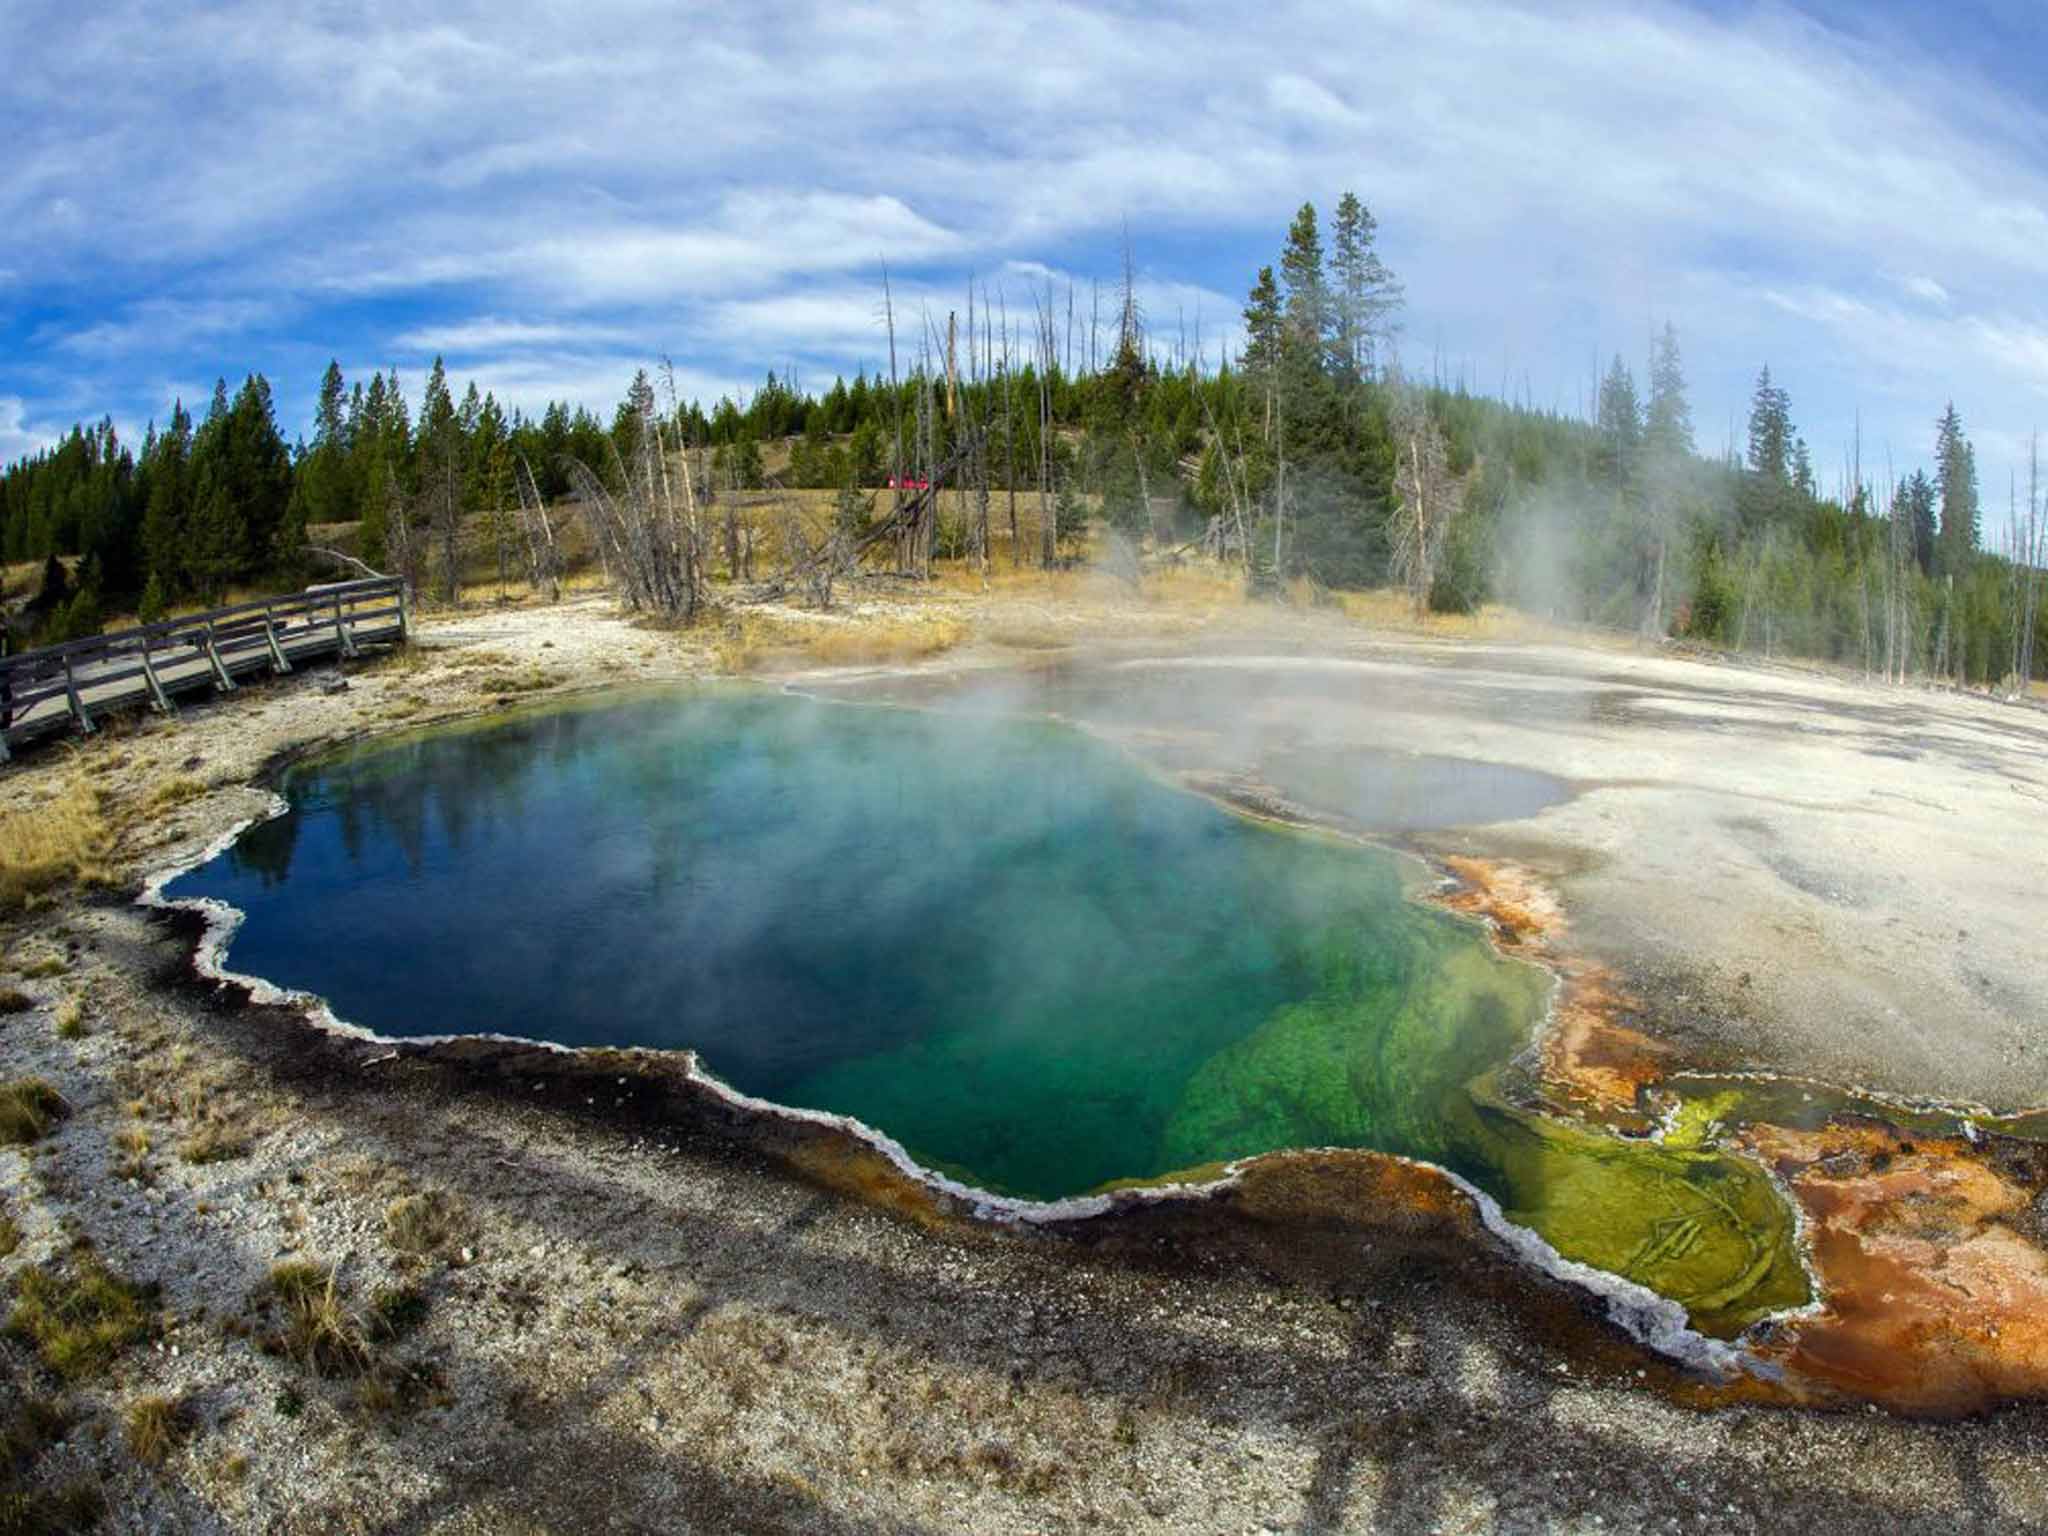 Geothermal pool in Yellowstone